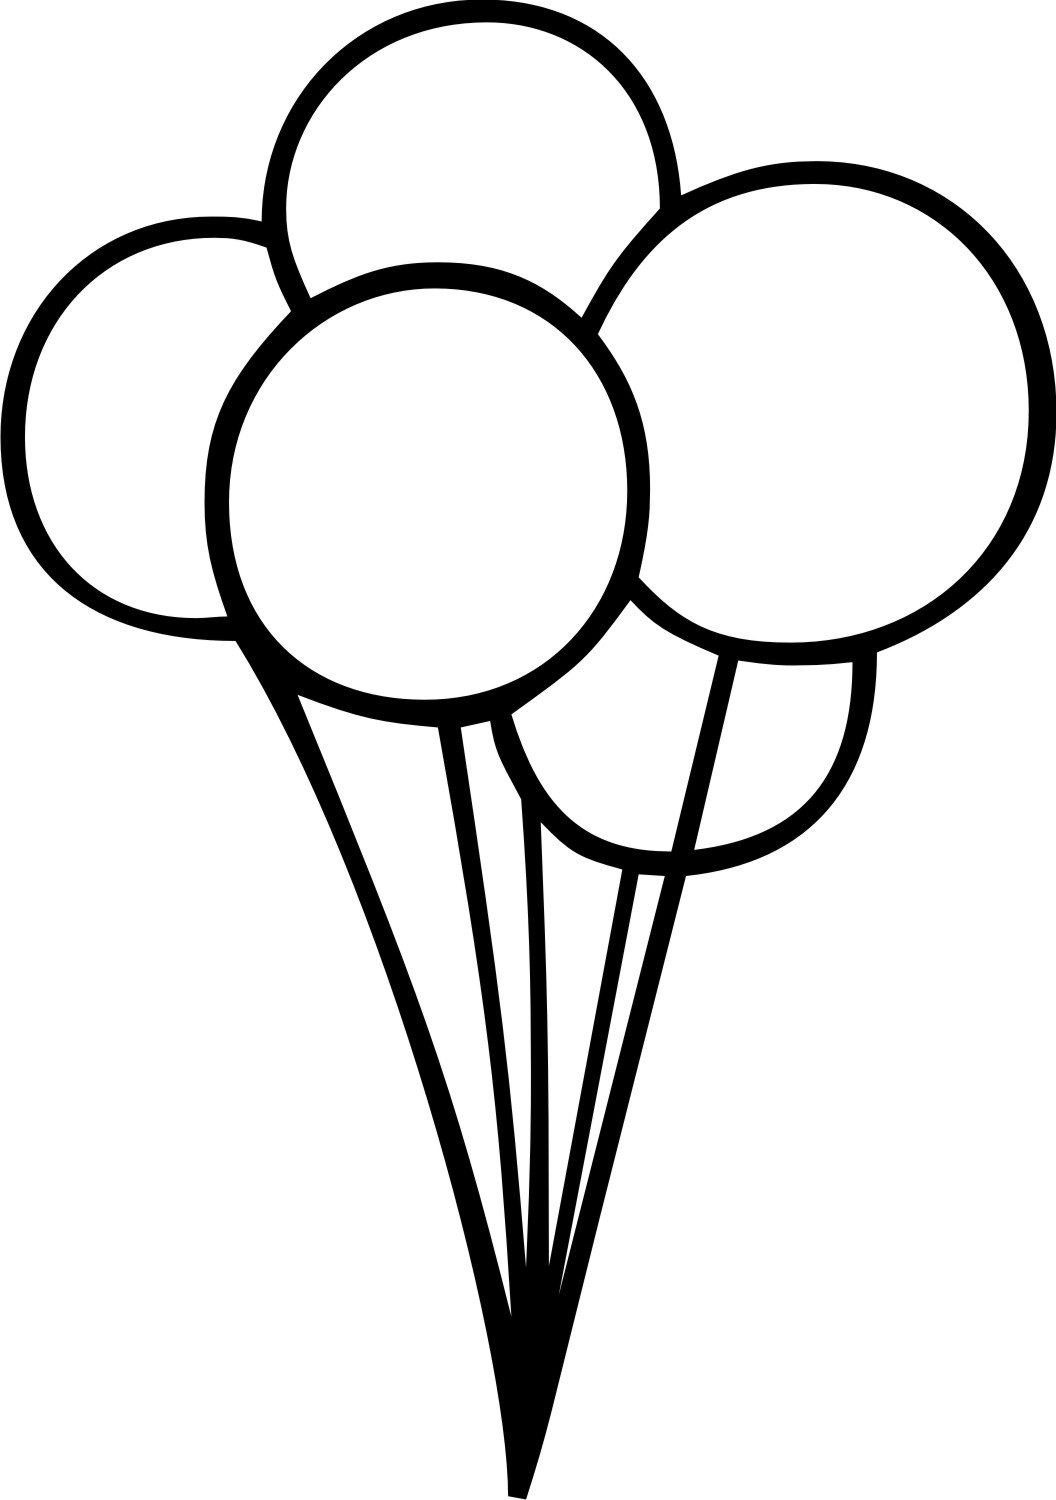 Images For > Single Balloon Clipart